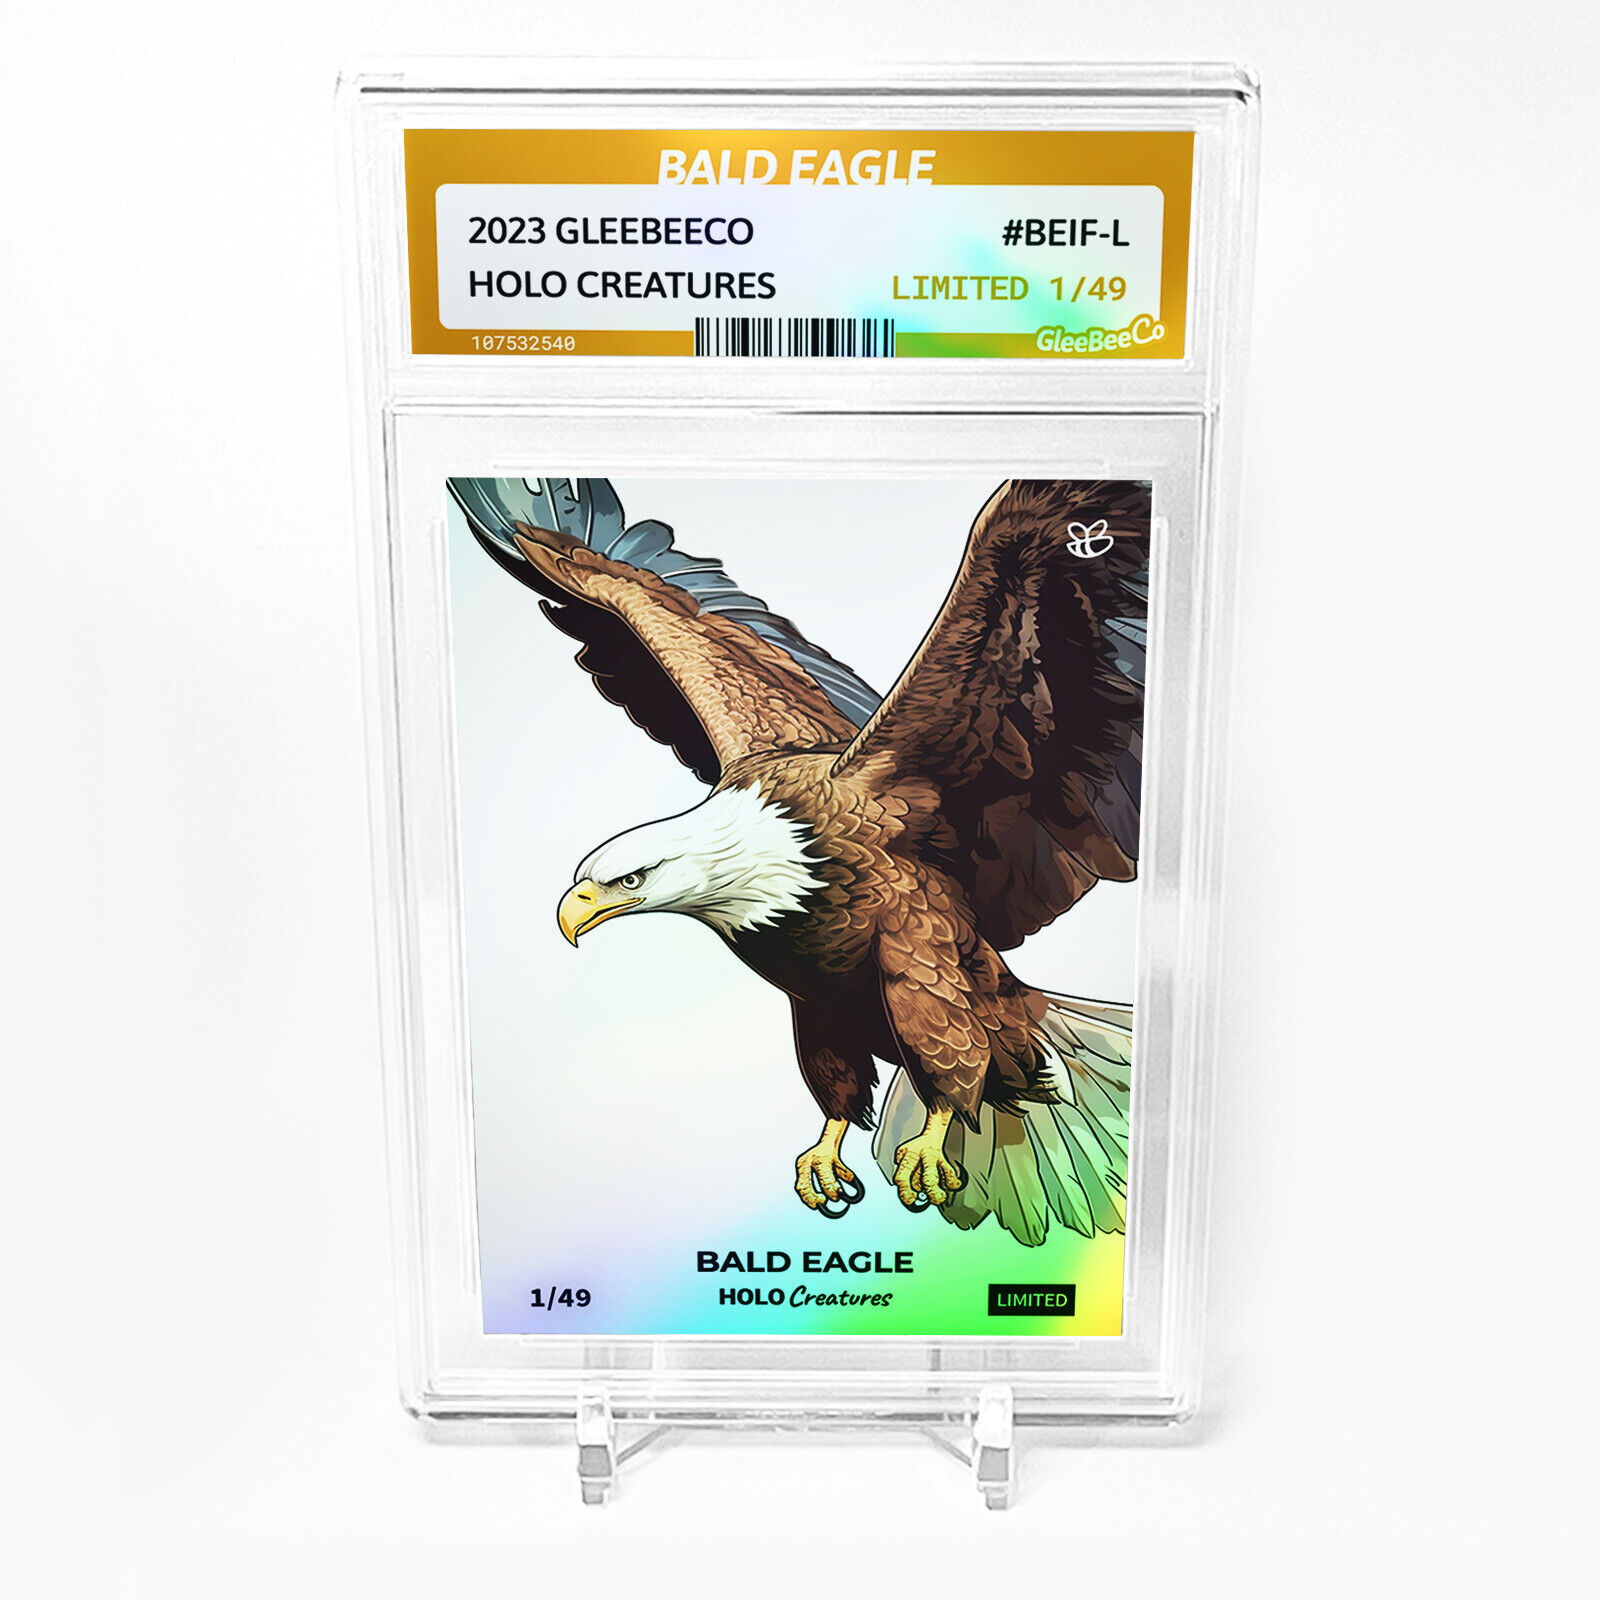 BALD EAGLE In Flight Card GleeBeeCo Holo Creatures *Slab* #BEIF-L Only /49